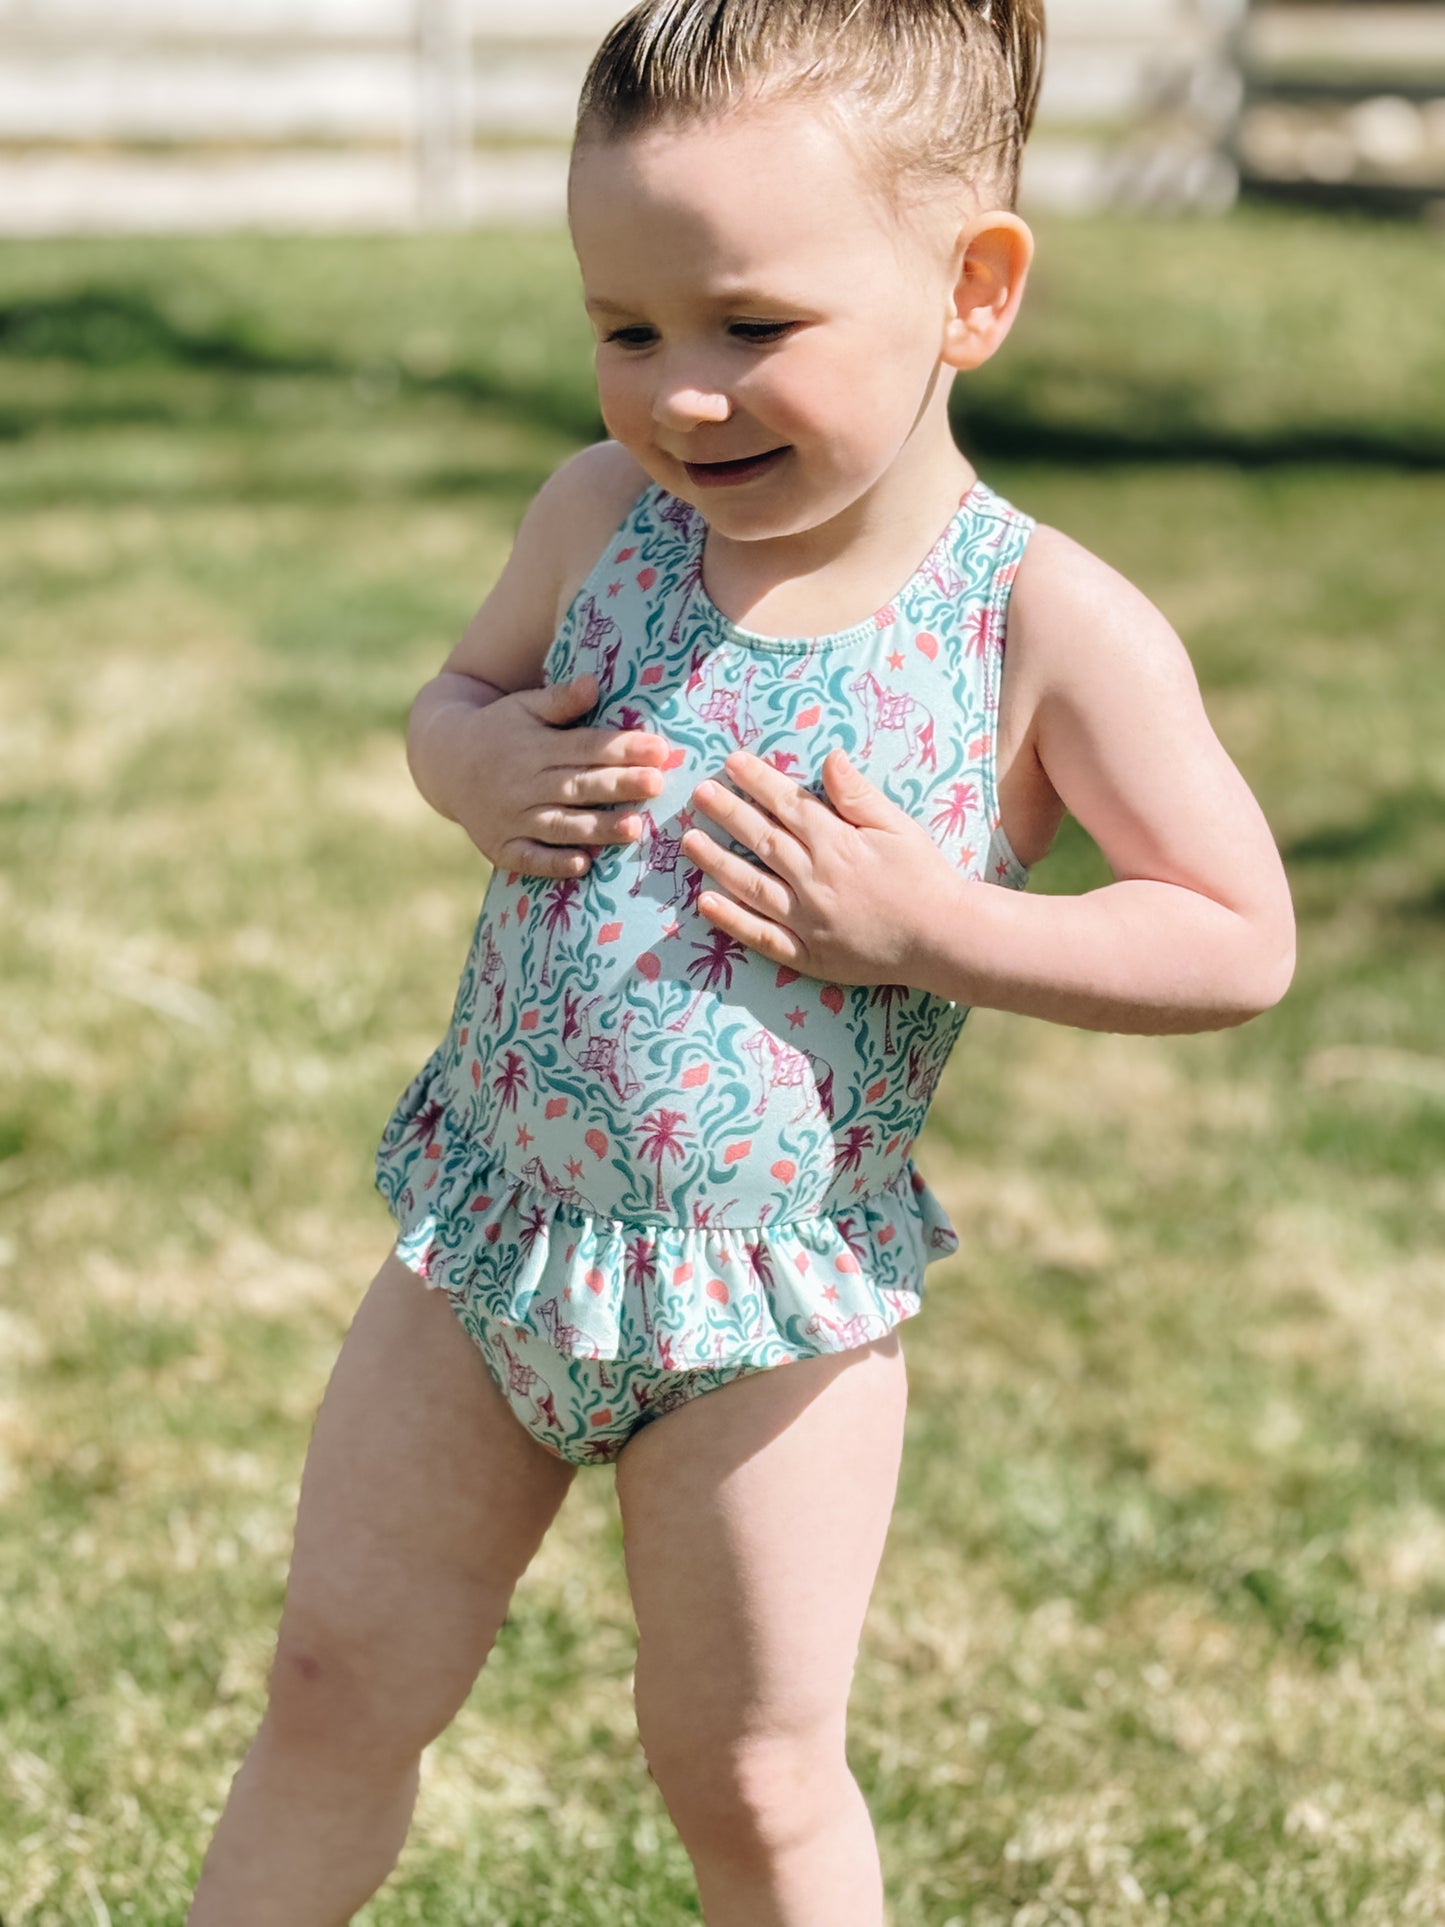 *Preorder* Beach Horse One-Piece Ruffle Swimsuit (Baby, Toddler, & Youth) - Teal